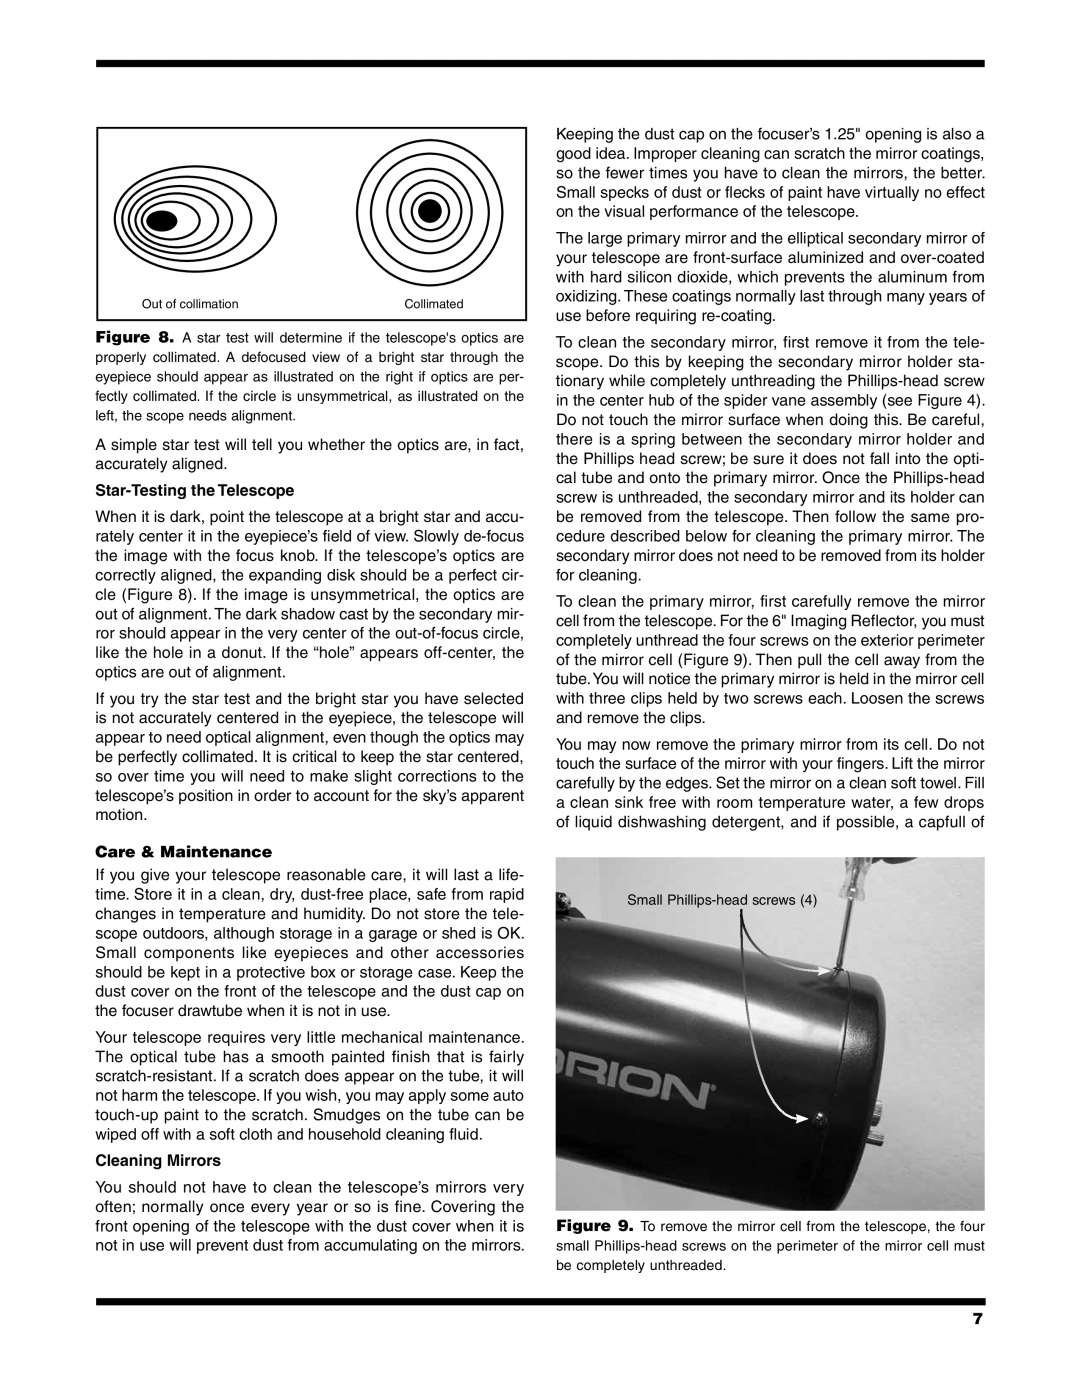 Orion 9786 instruction manual Star-Testing the Telescope, Care & Maintenance, Cleaning Mirrors 